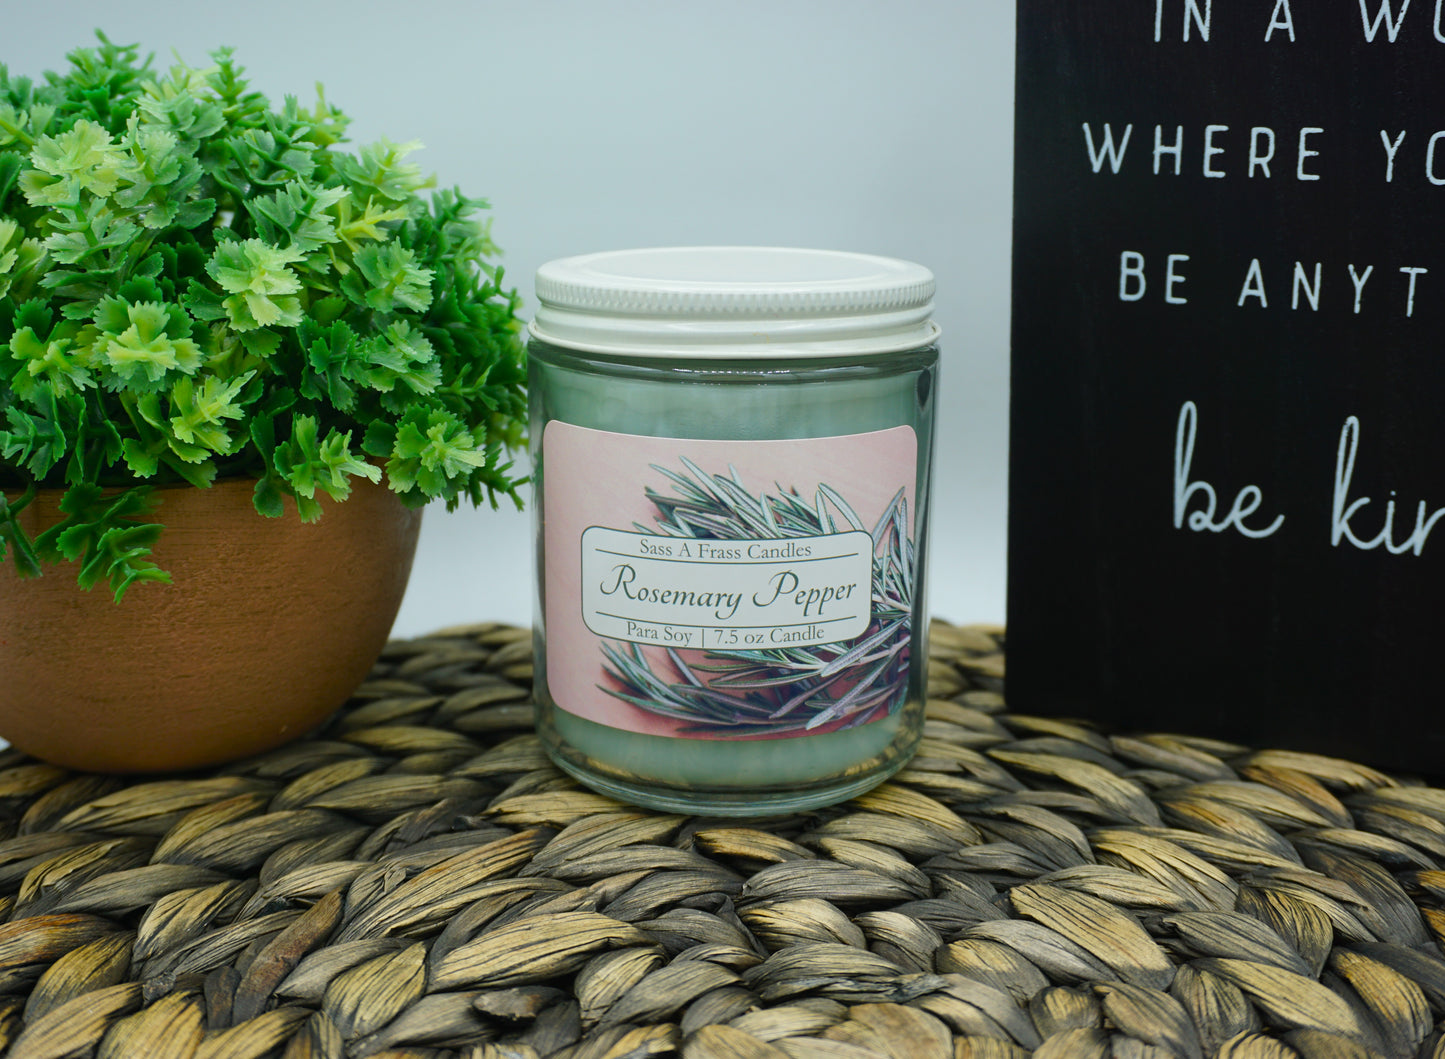 Rosemary Pepper 7.5 oz Candle